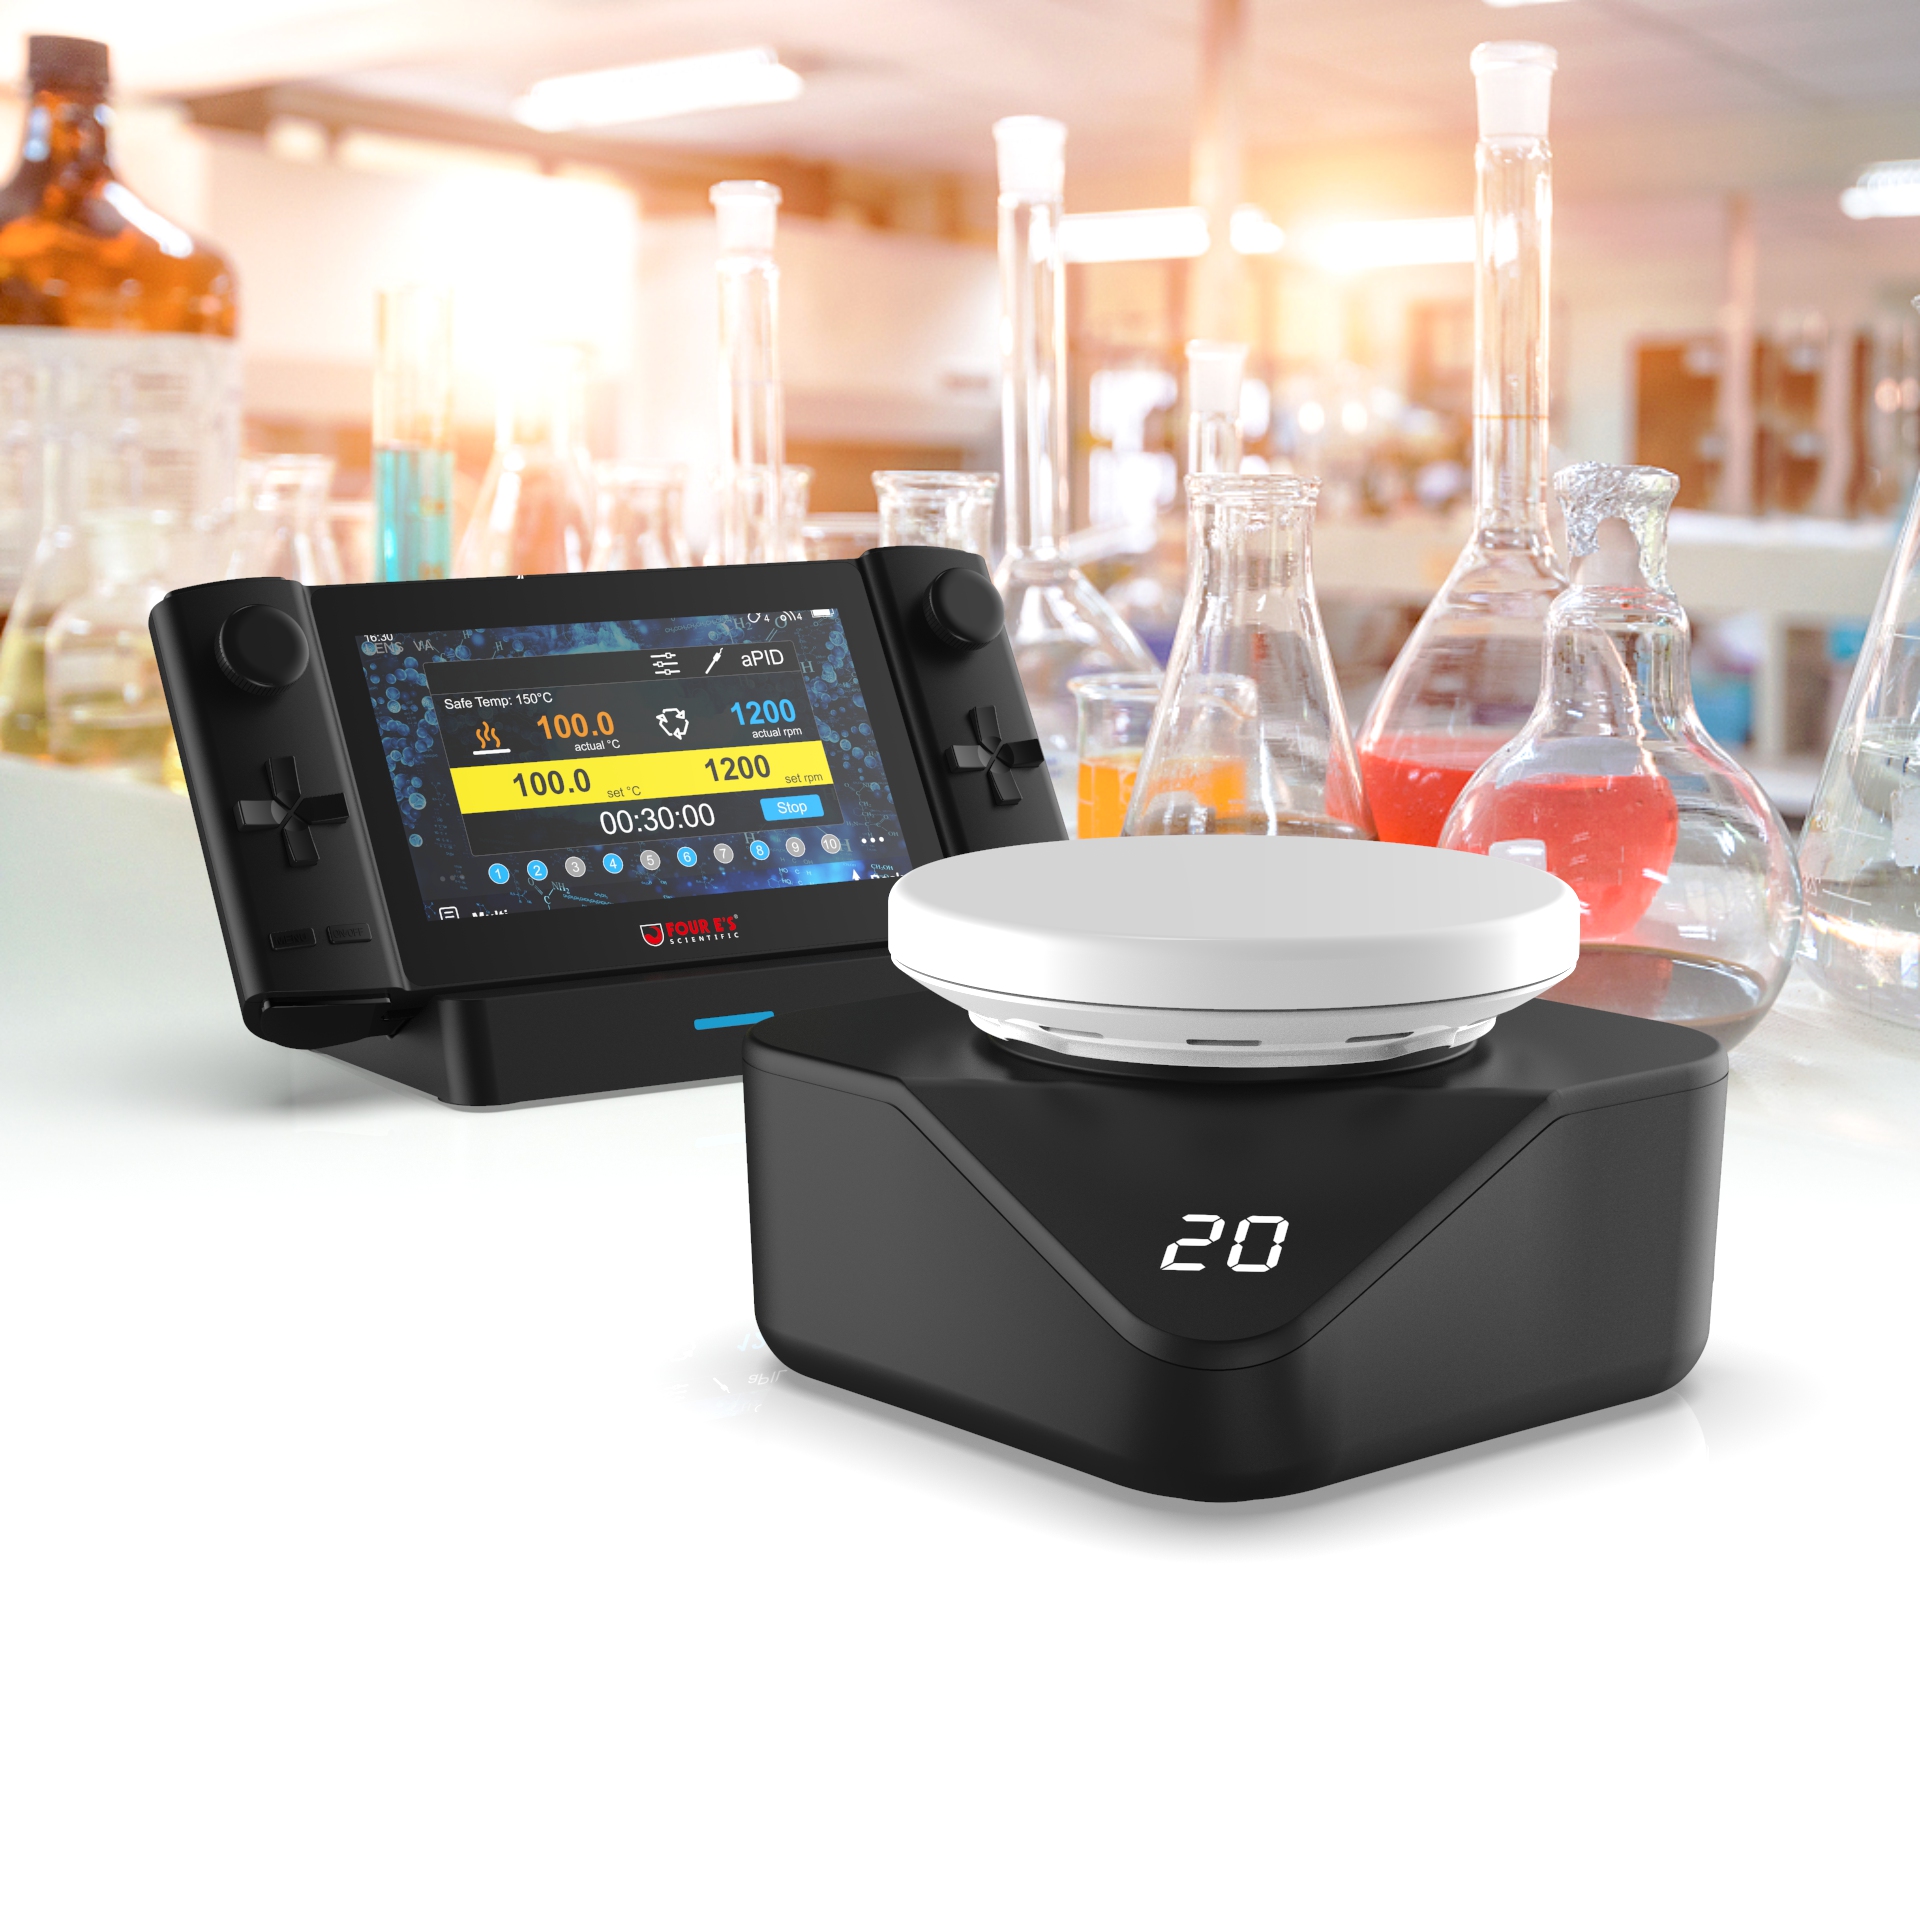 5" Multi Magnetic Hotplate Stirrers With Hub Control